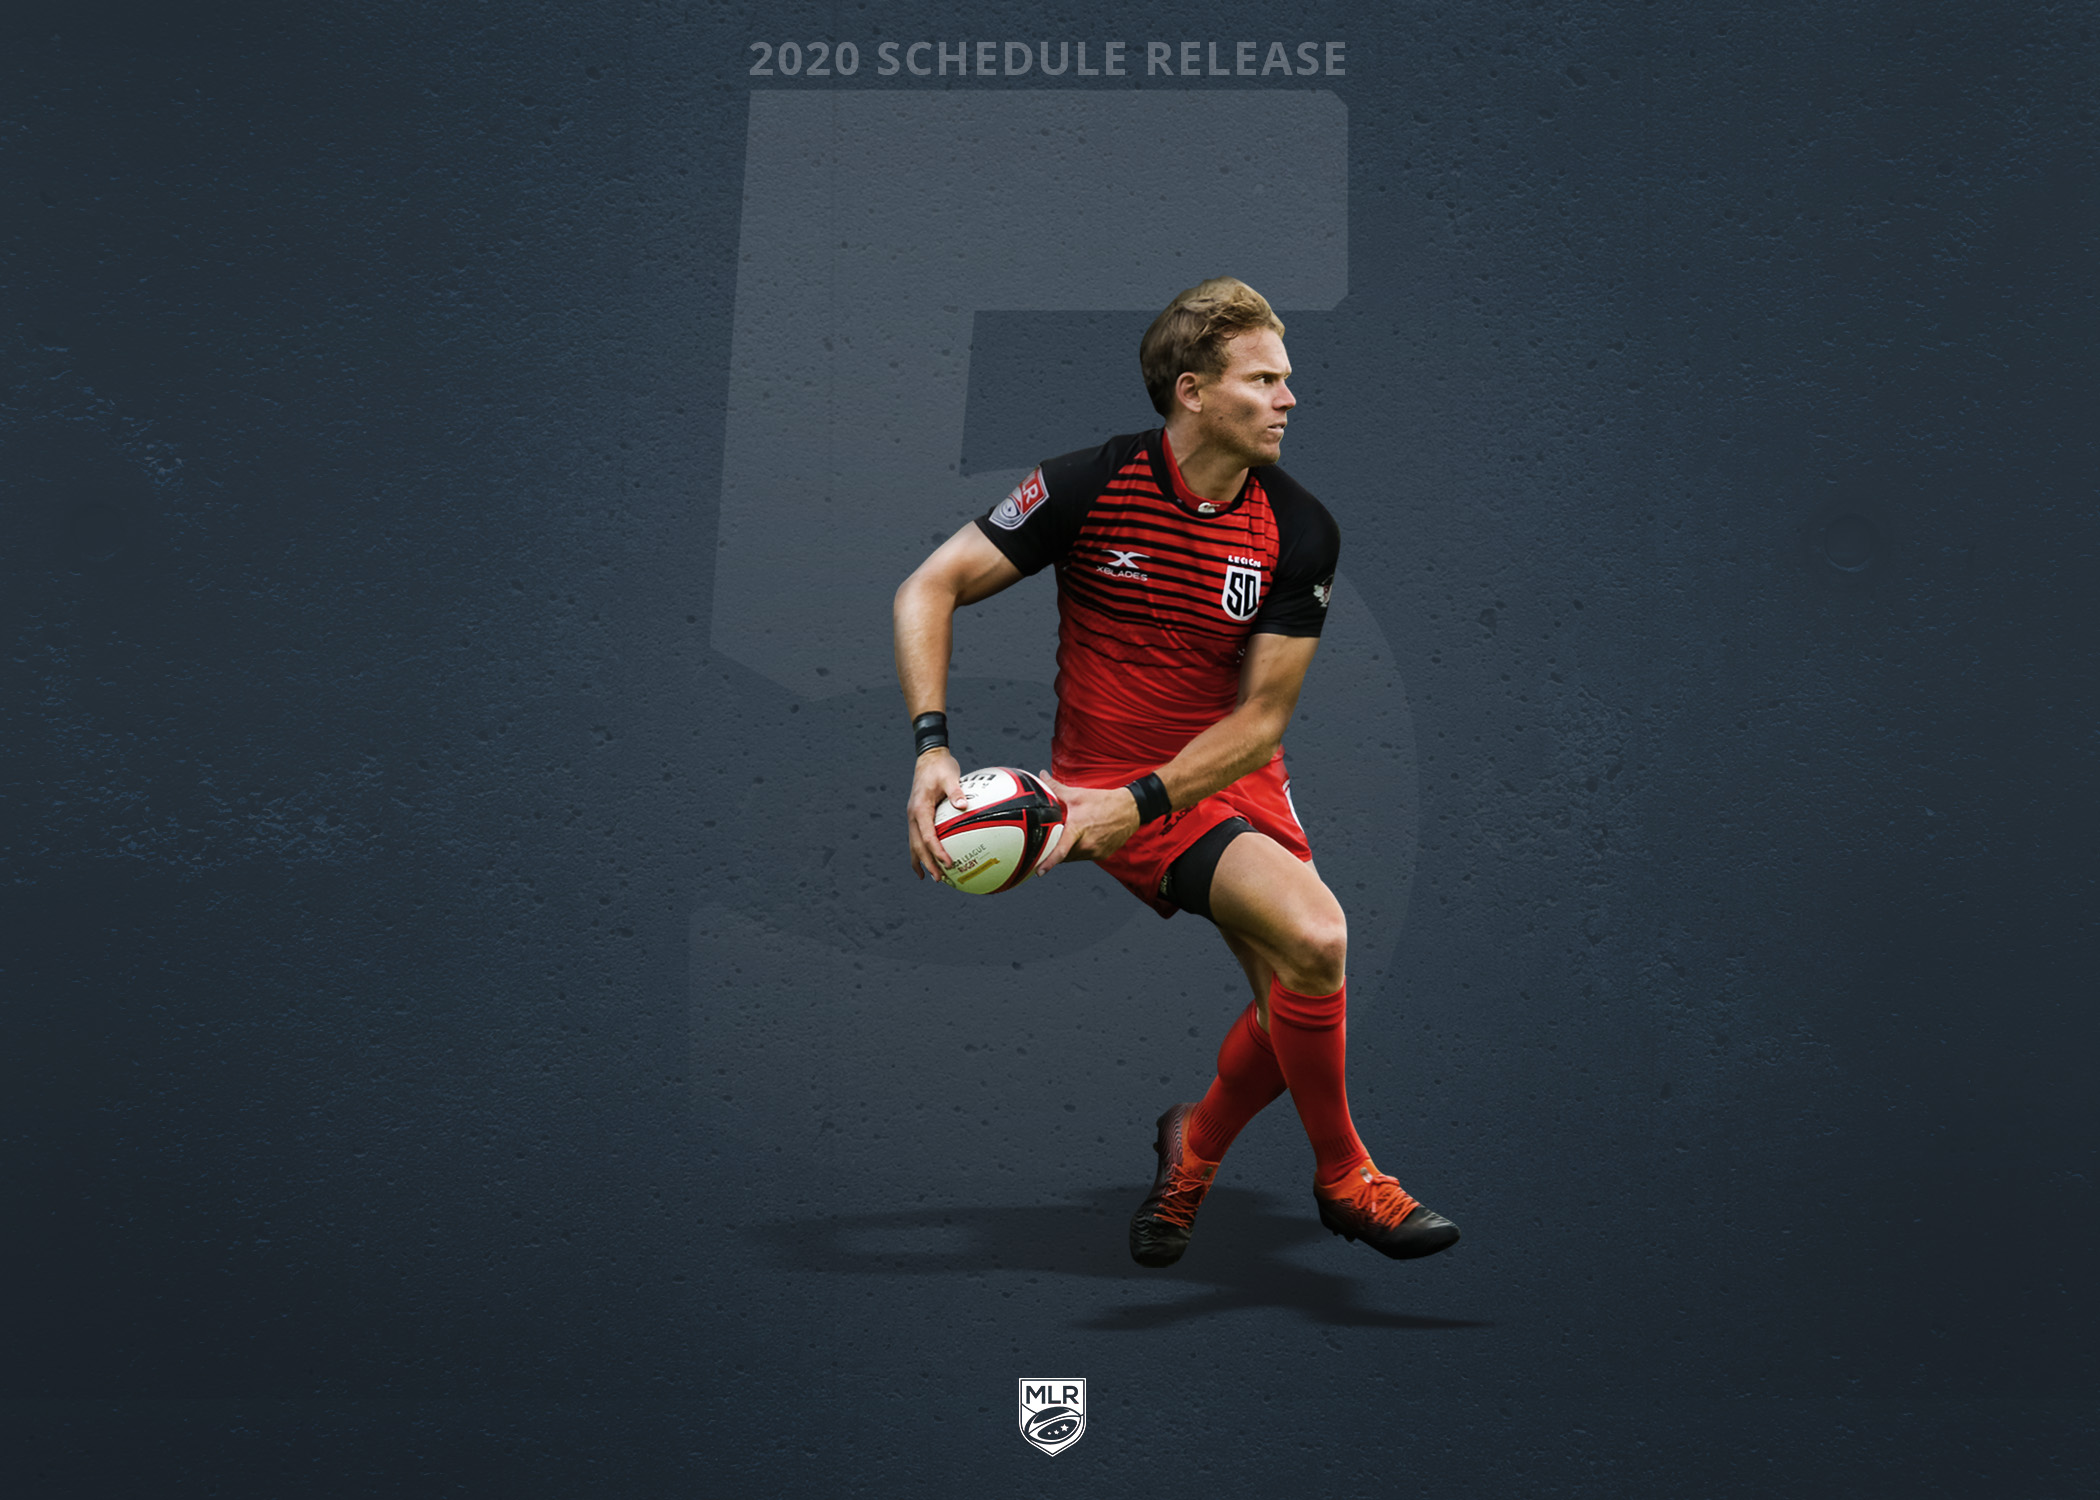 Five days remain until the MLR 2020 Schedule Release